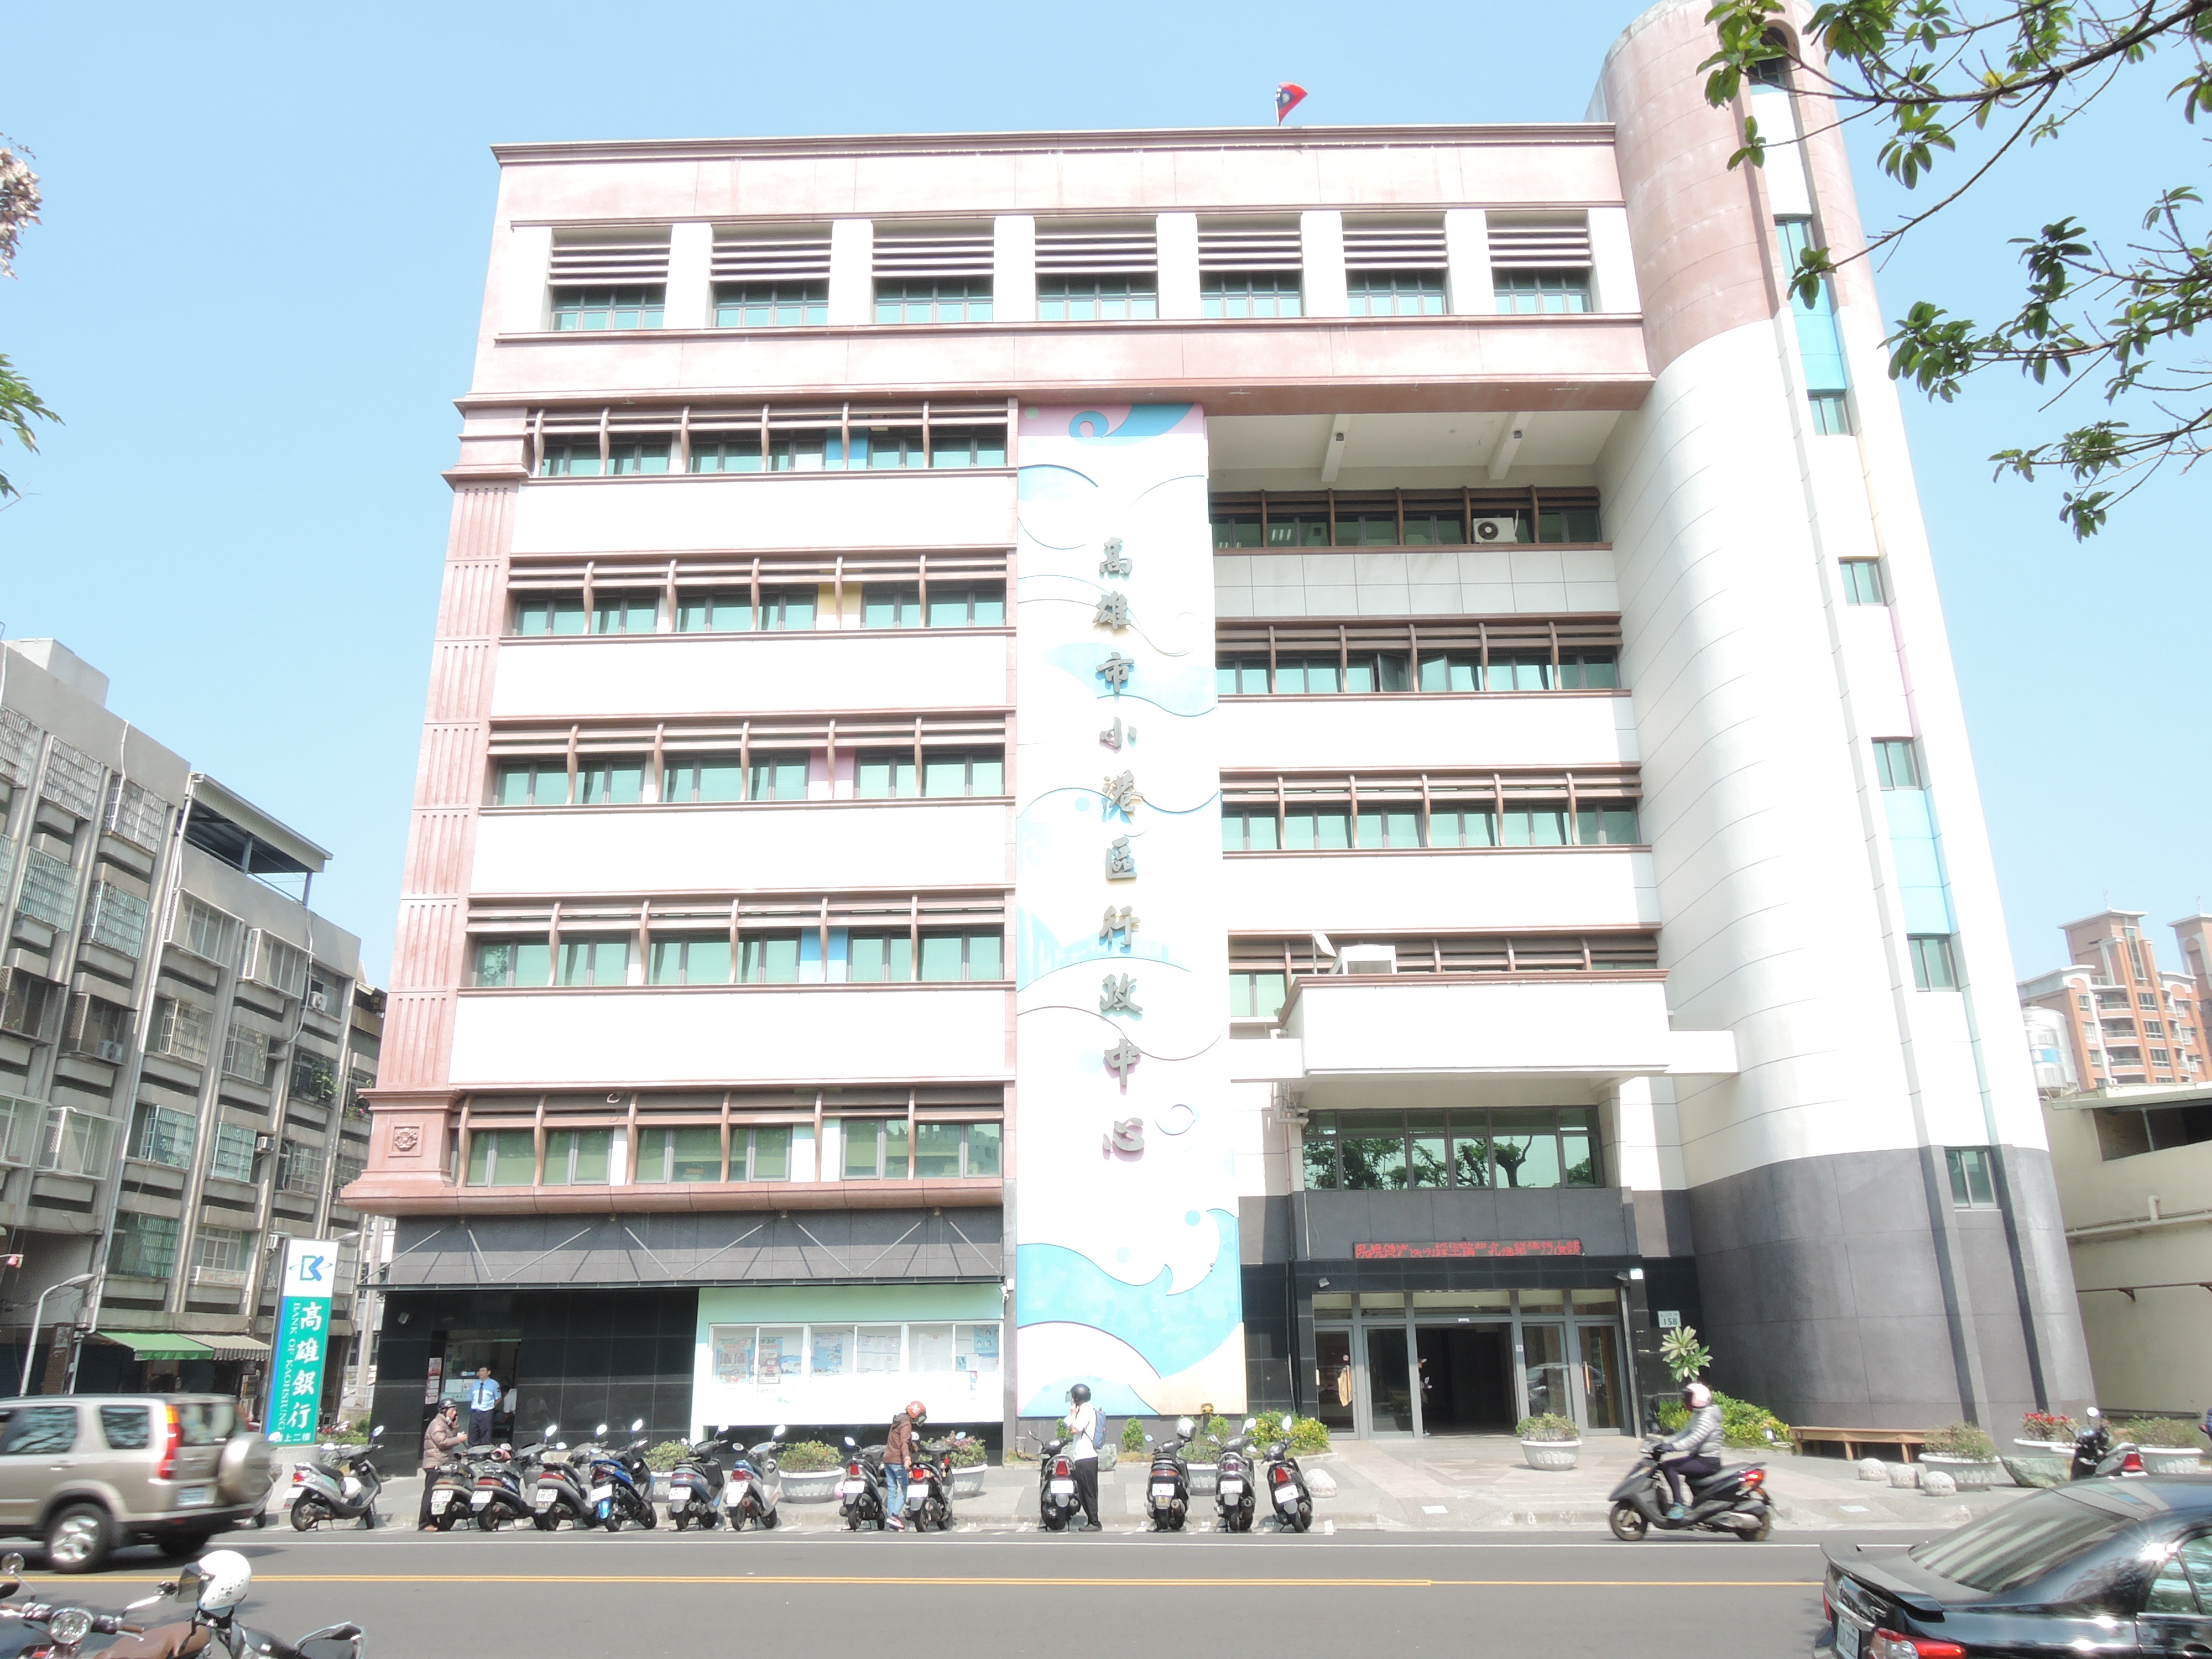 Front Photo of Siaogang Office.jpg